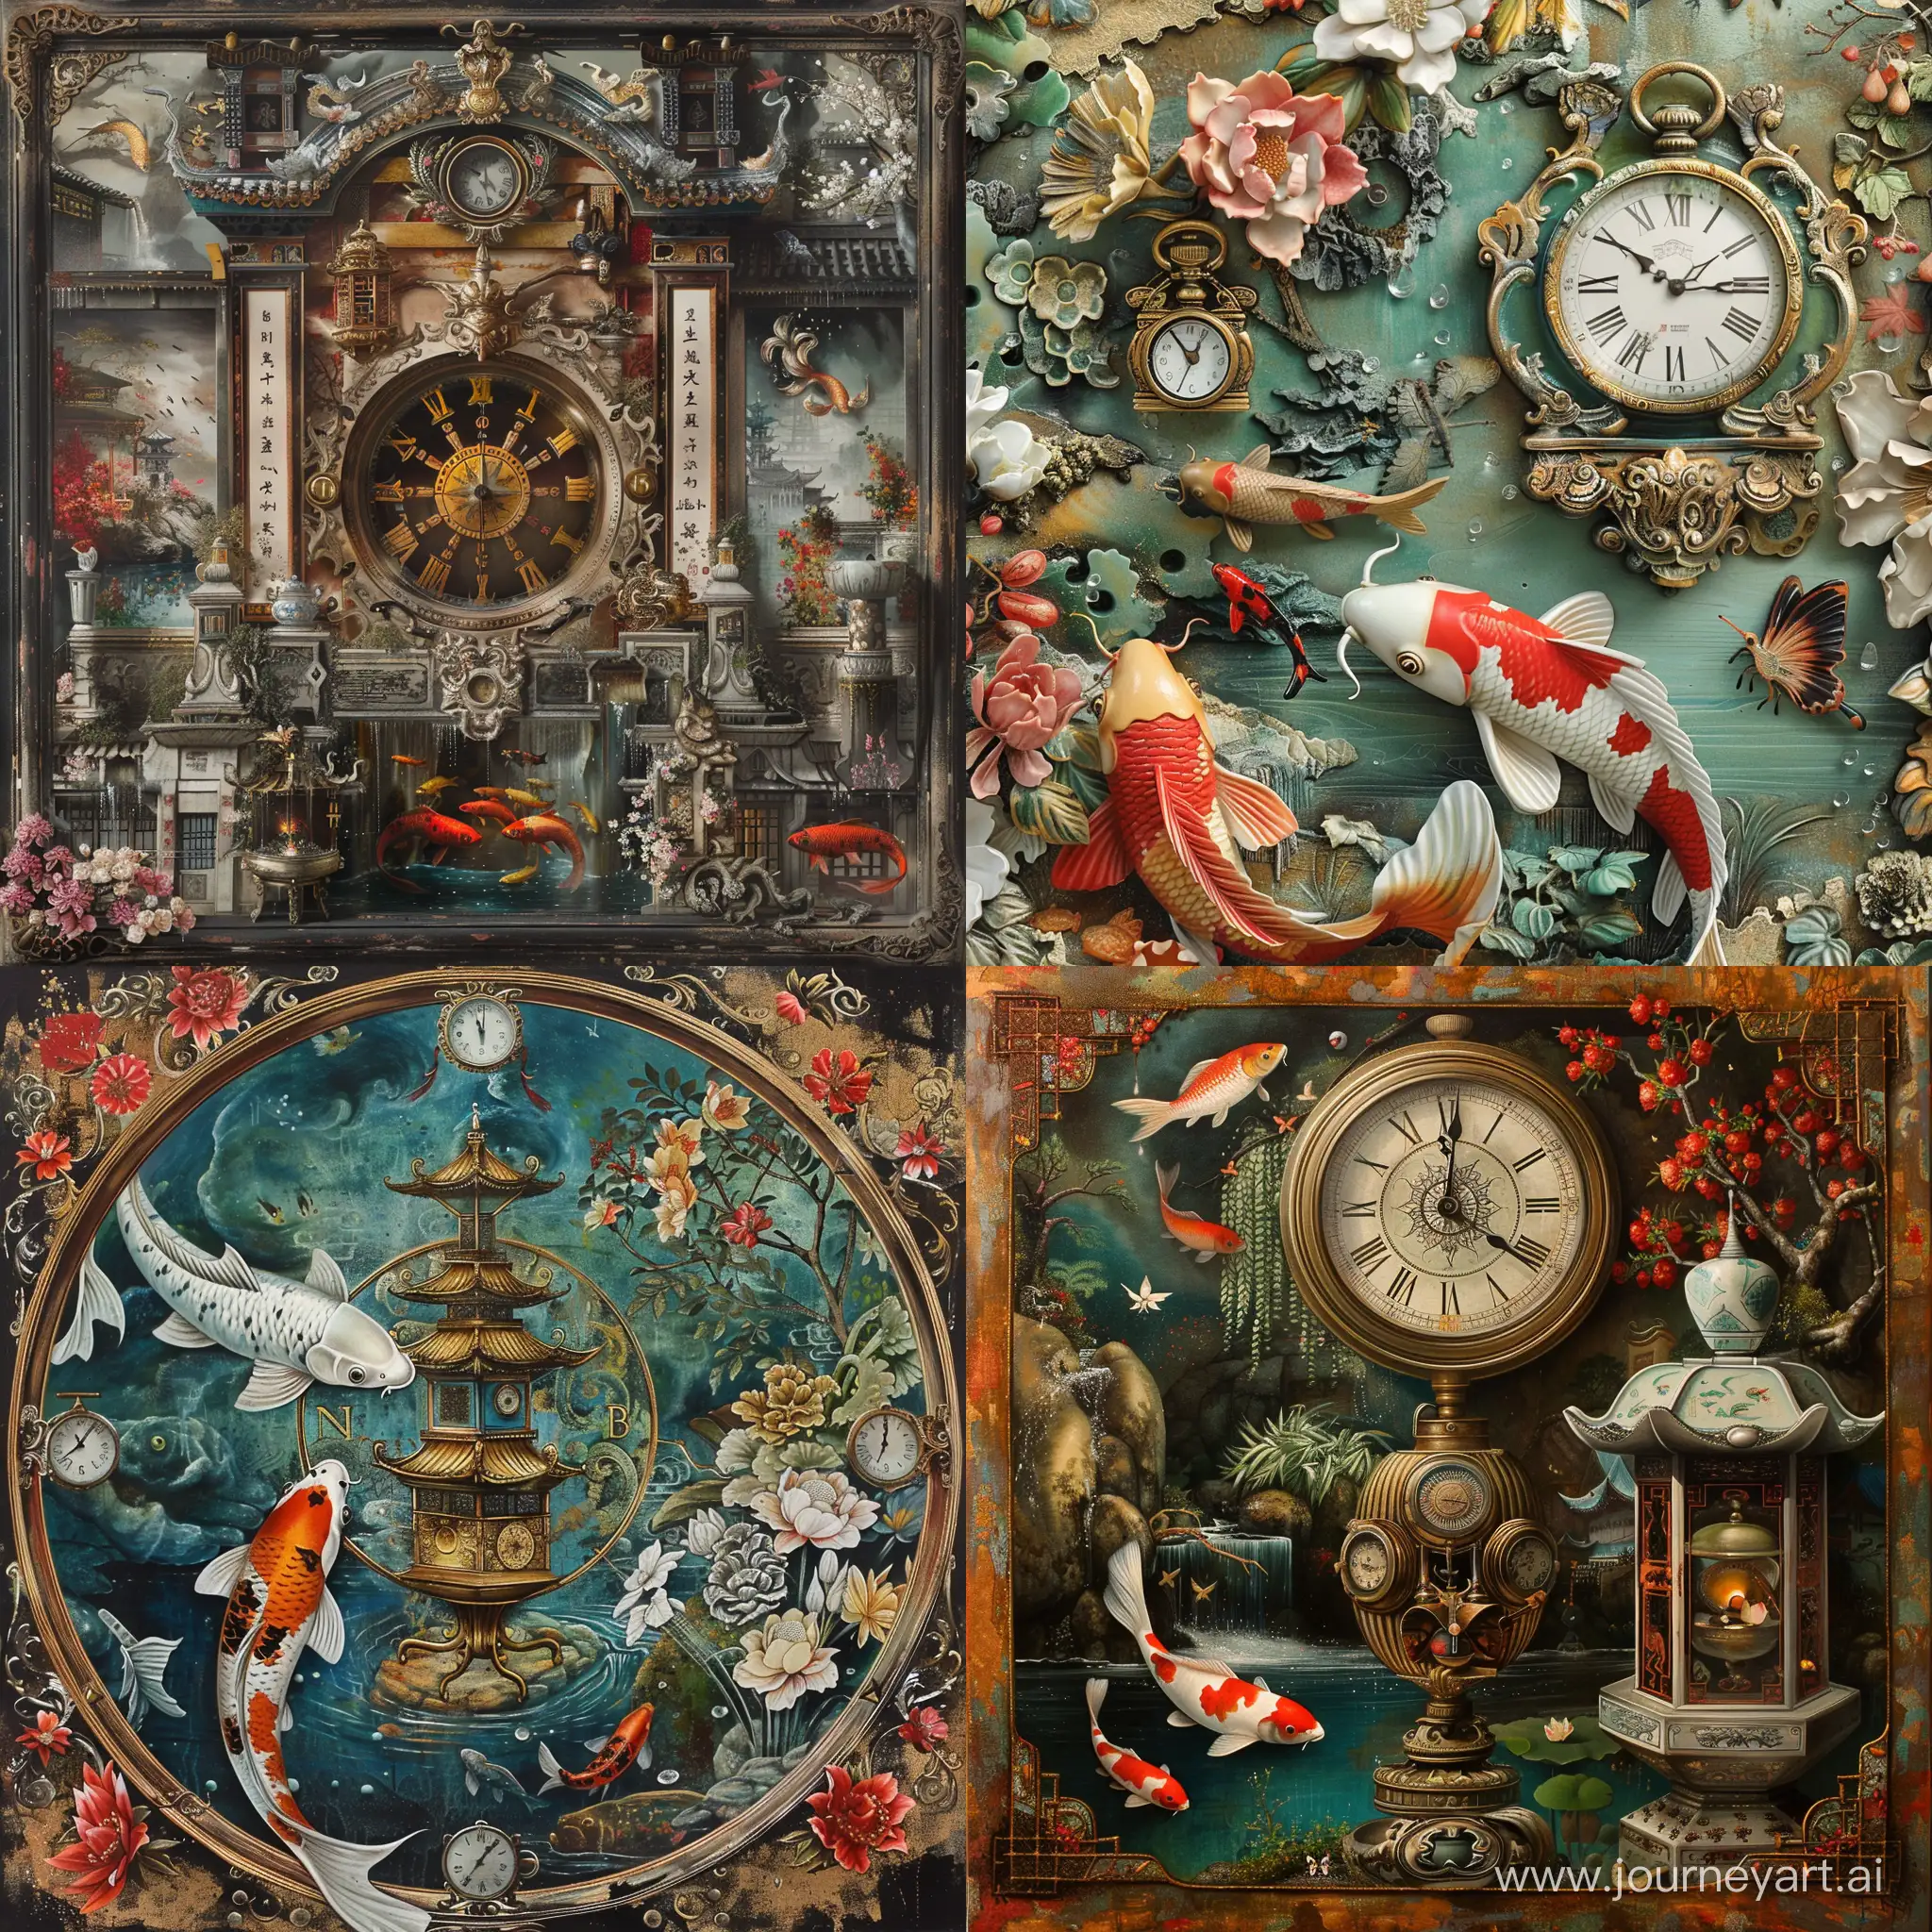 Steampunk-Pocket-Watch-and-Lantern-in-Ornate-Asian-Decor-Setting